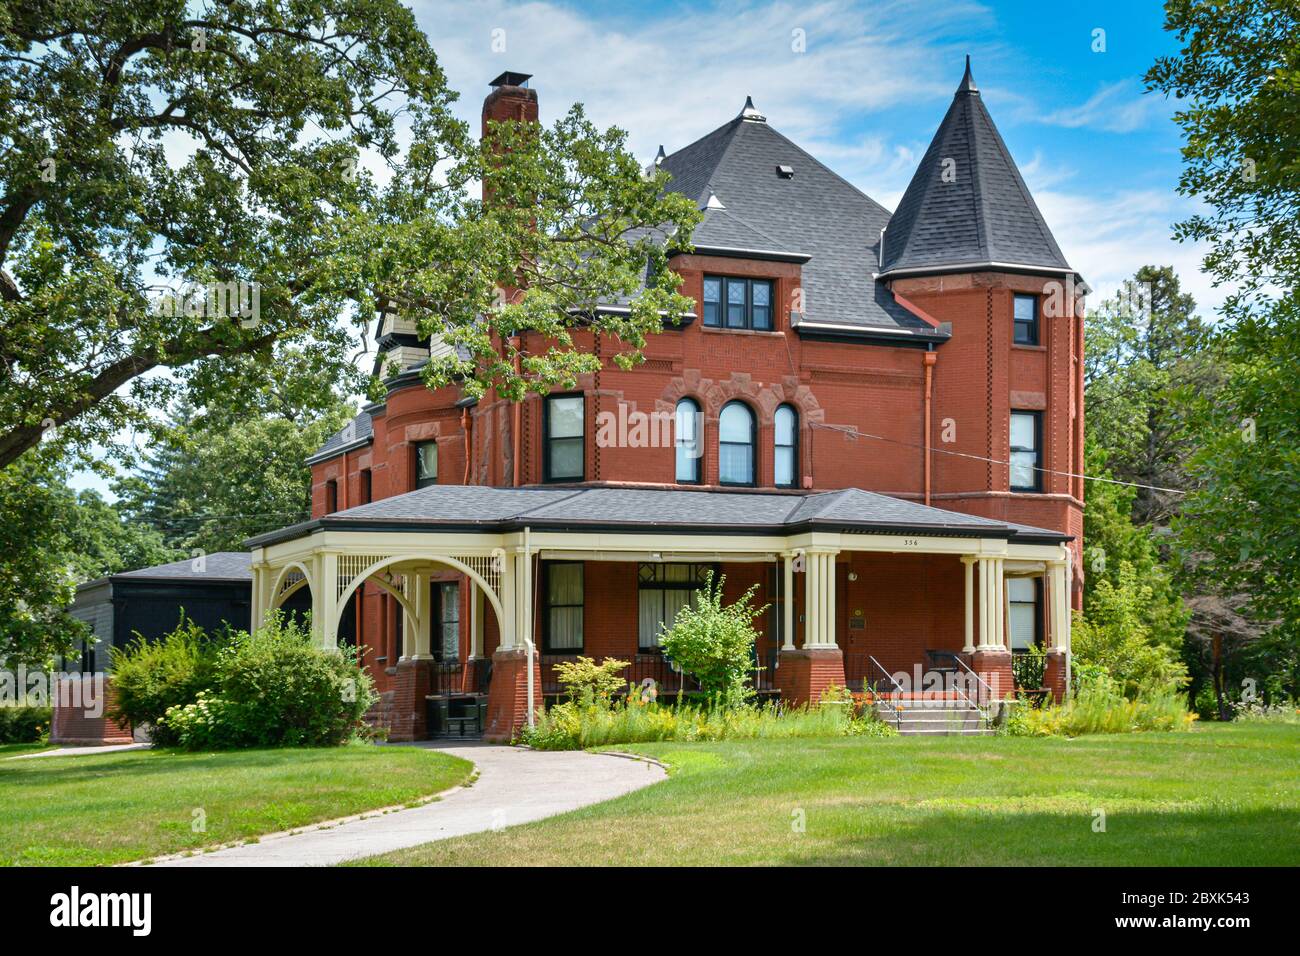 A stunning Queen Anne architectural style residence built in 1893 for  Nehemiah P. Clark in St. Cloud, MN, USA Stock Photo